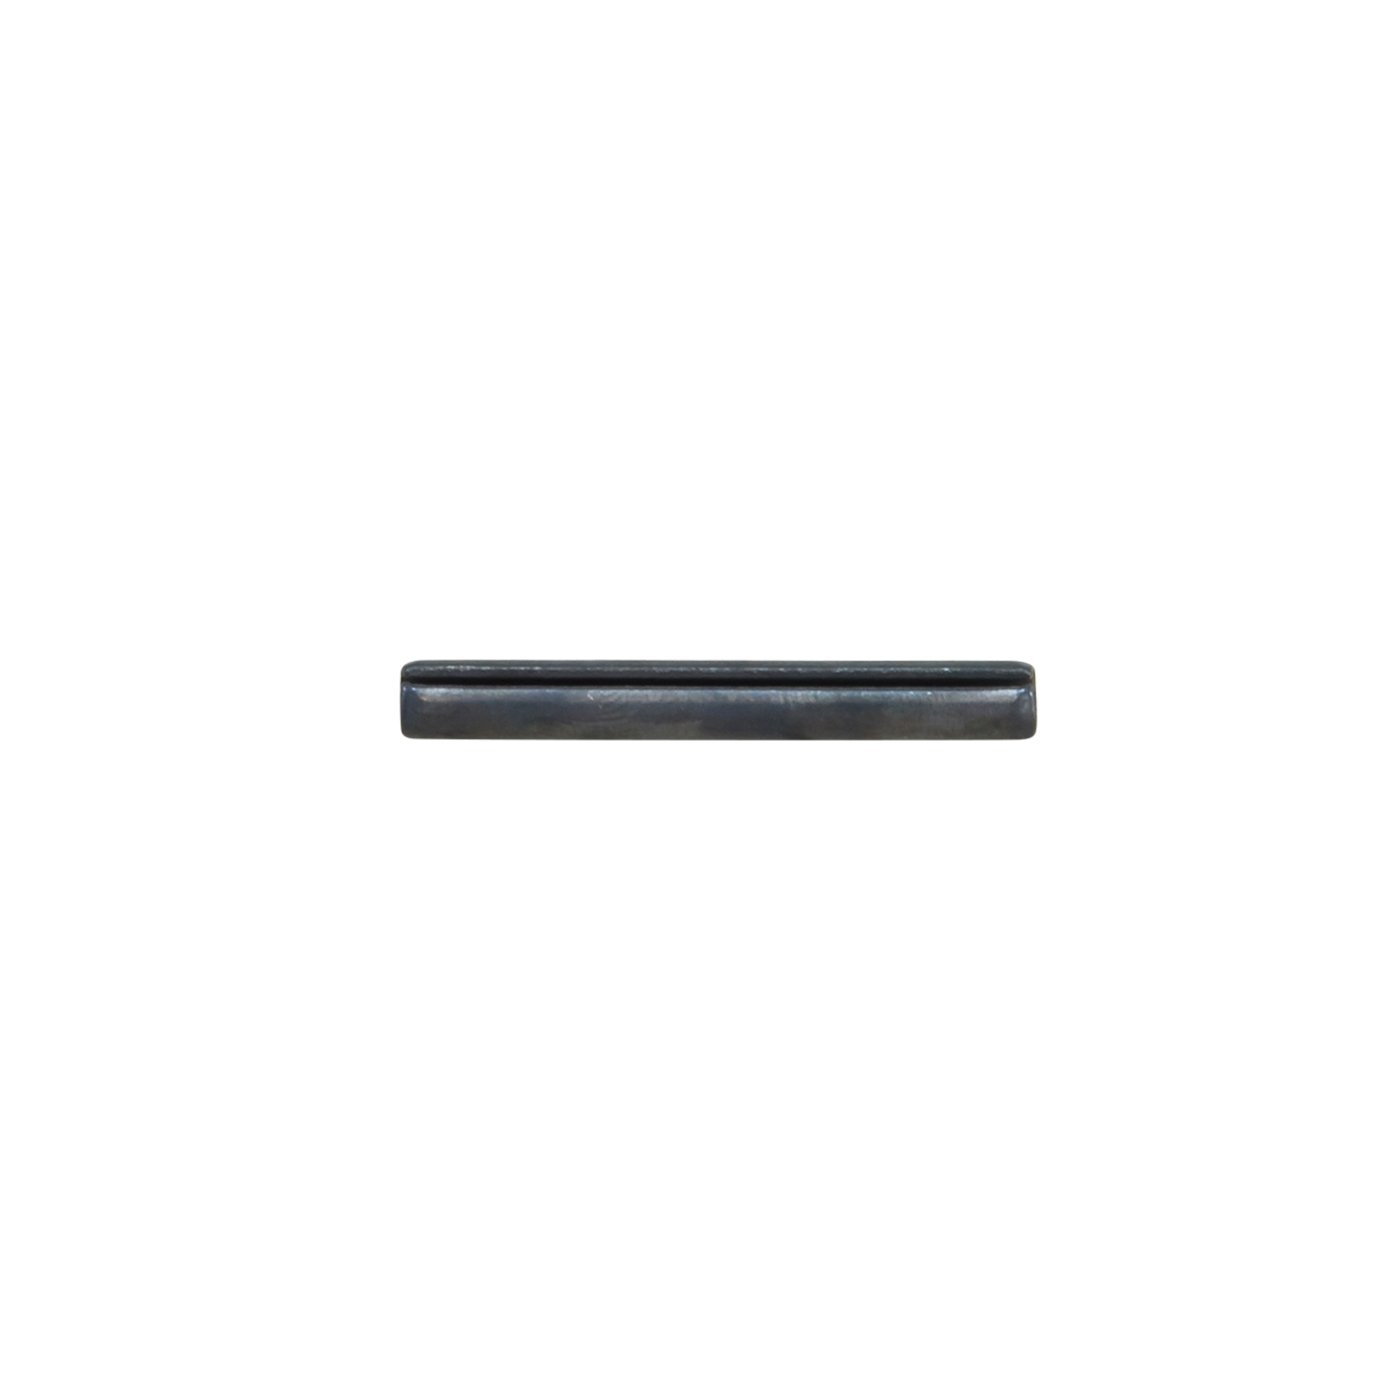 Model 35 Roll Pin For Cross Pin Shaft, 0.190 in. Dia.